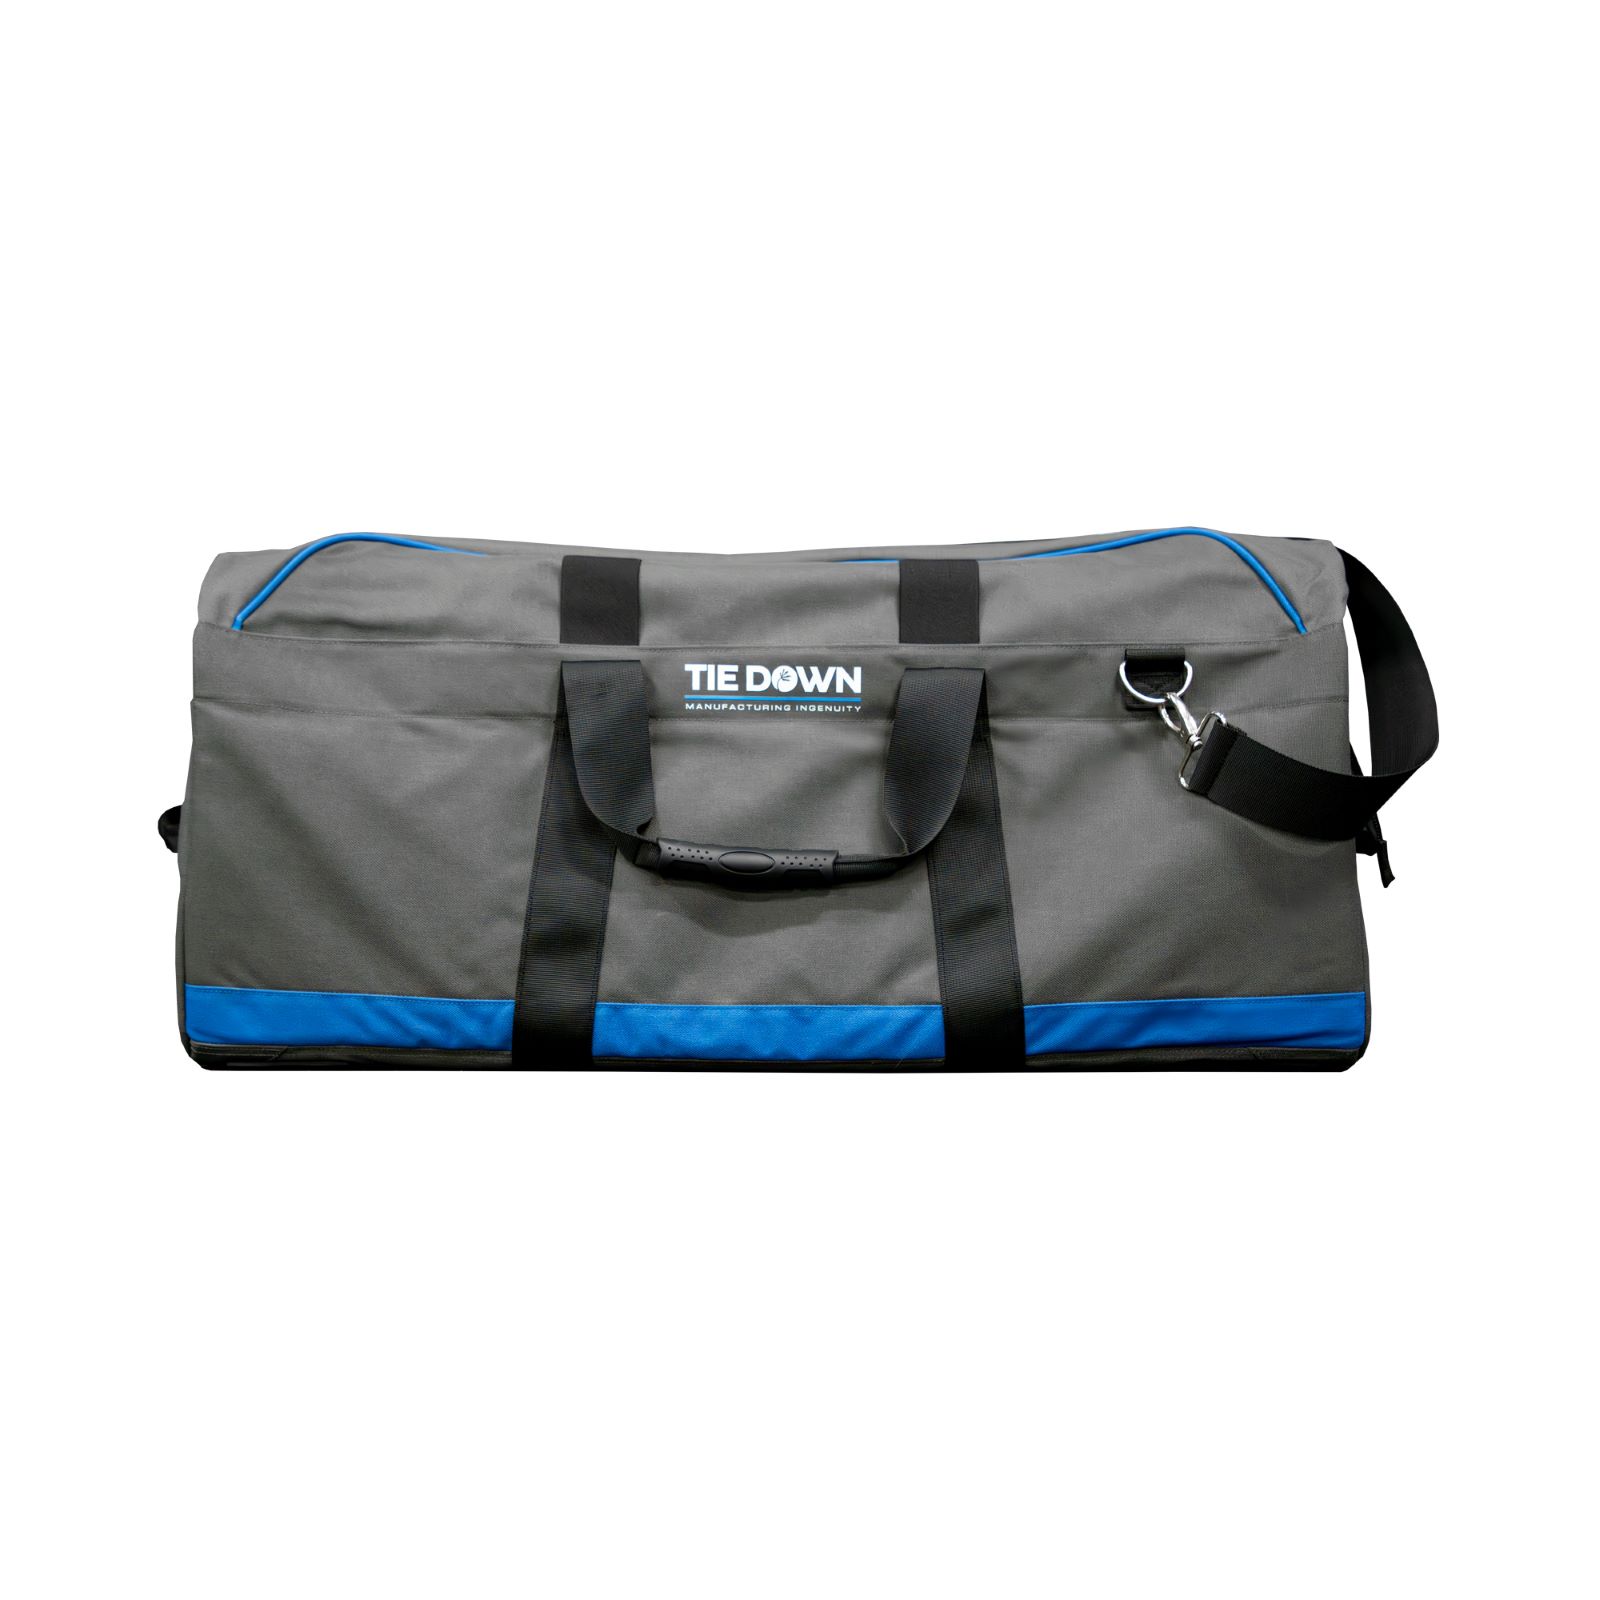 Tie Down 15541 Safety Utility Bag